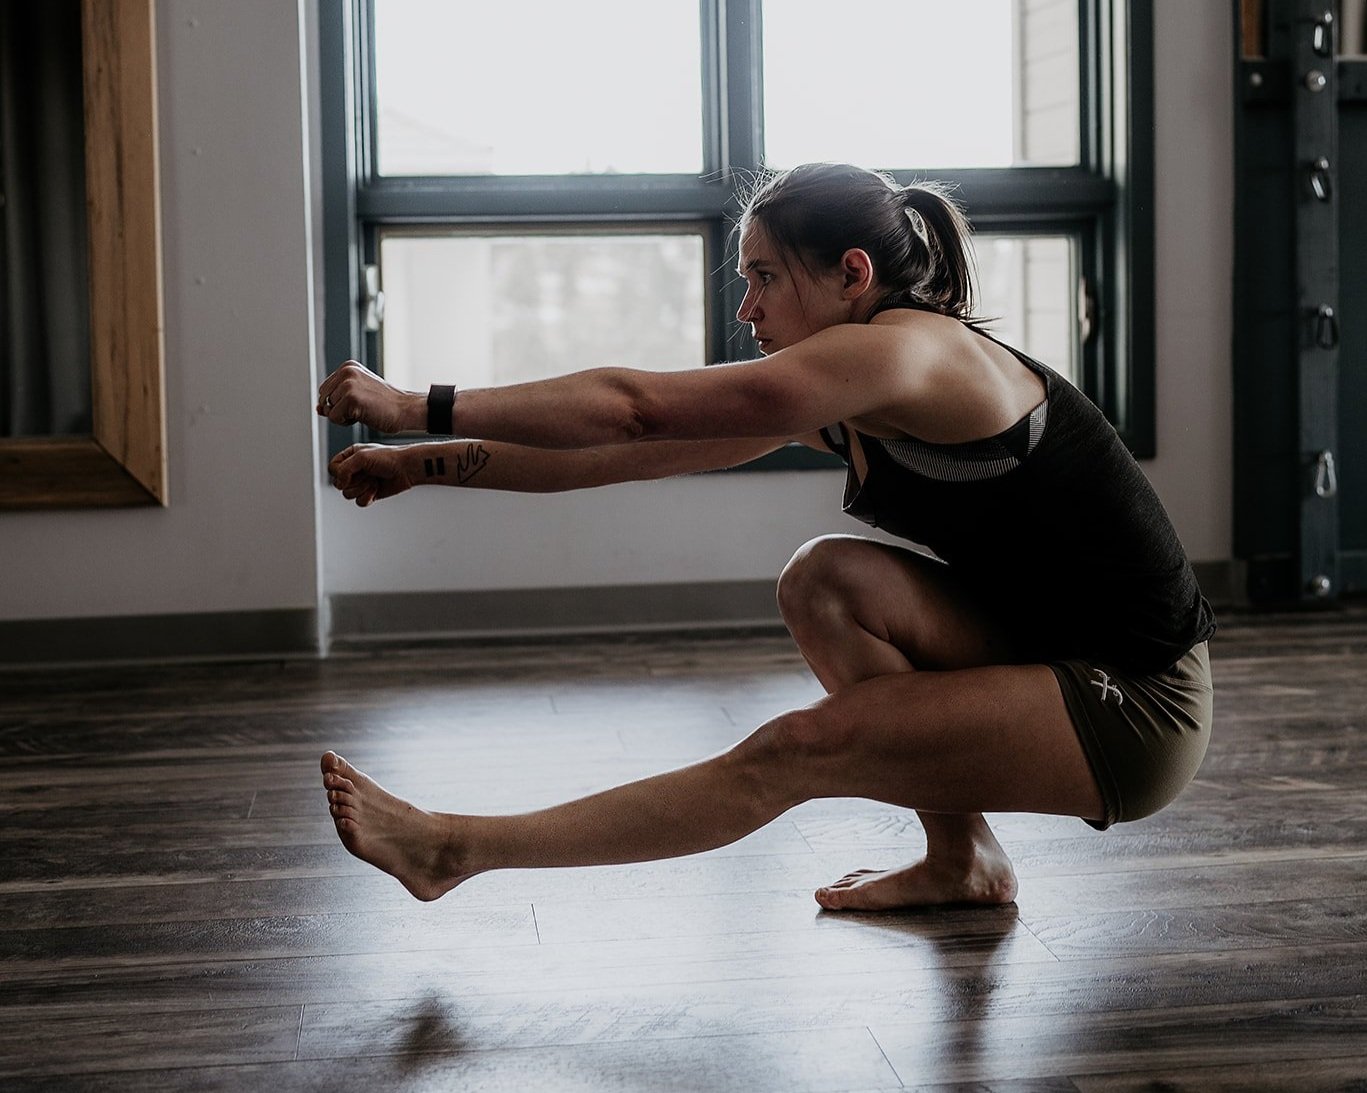 personal trainer performing a pistol squat in bare feet